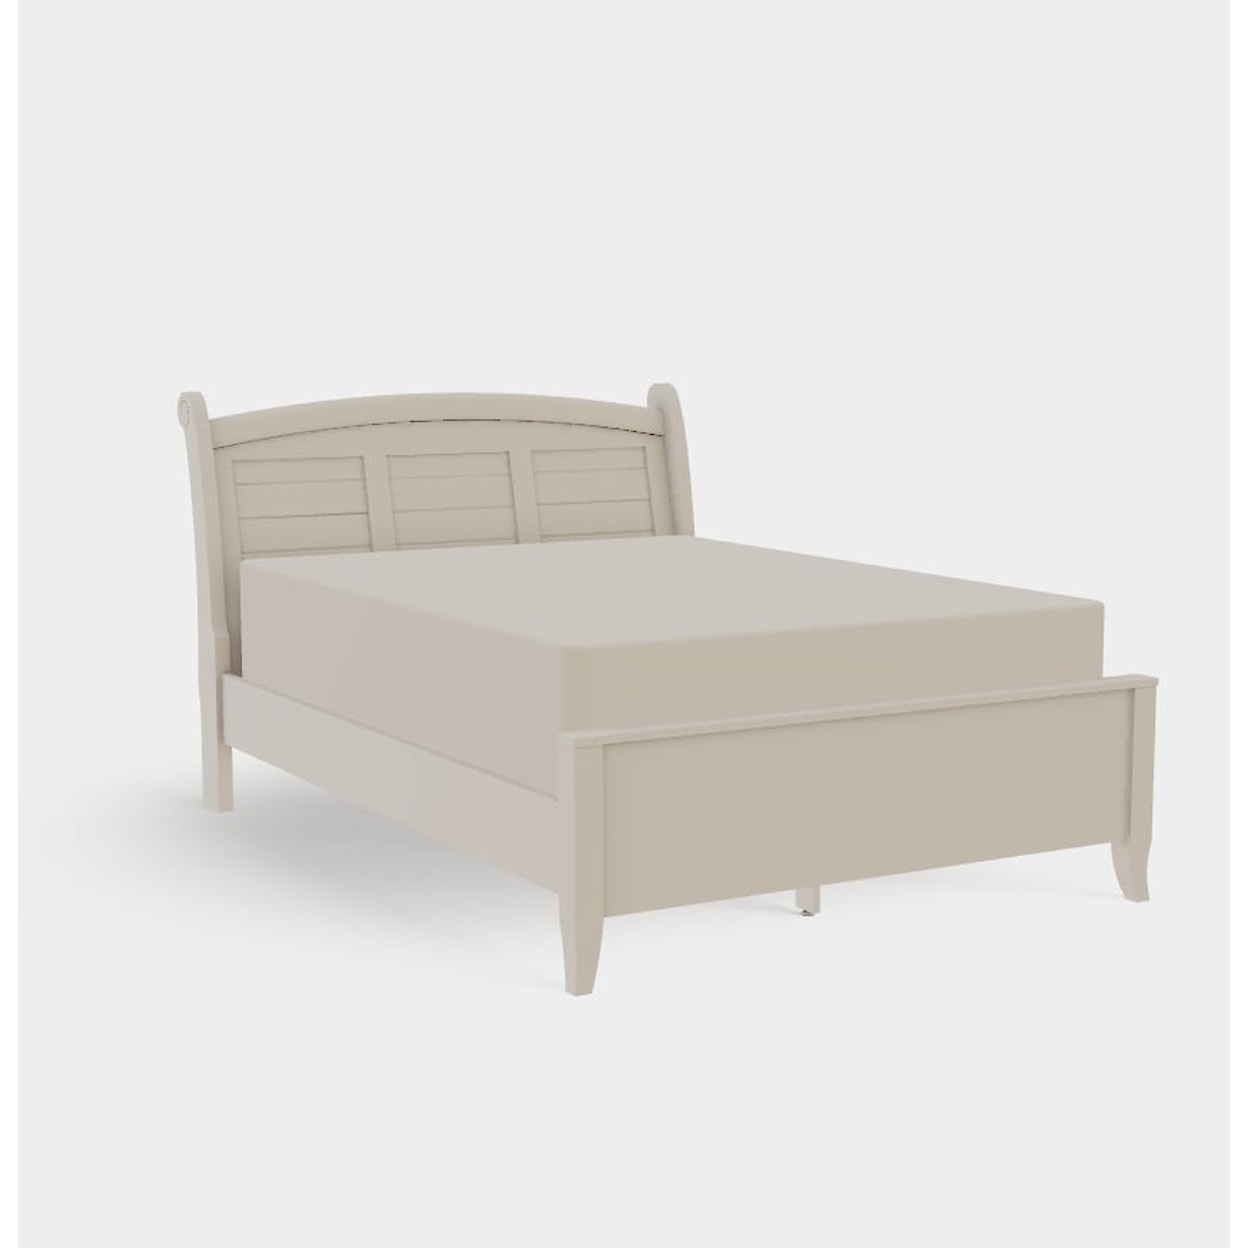 Mavin Tribeca Queen Arched Low Footboard Bed